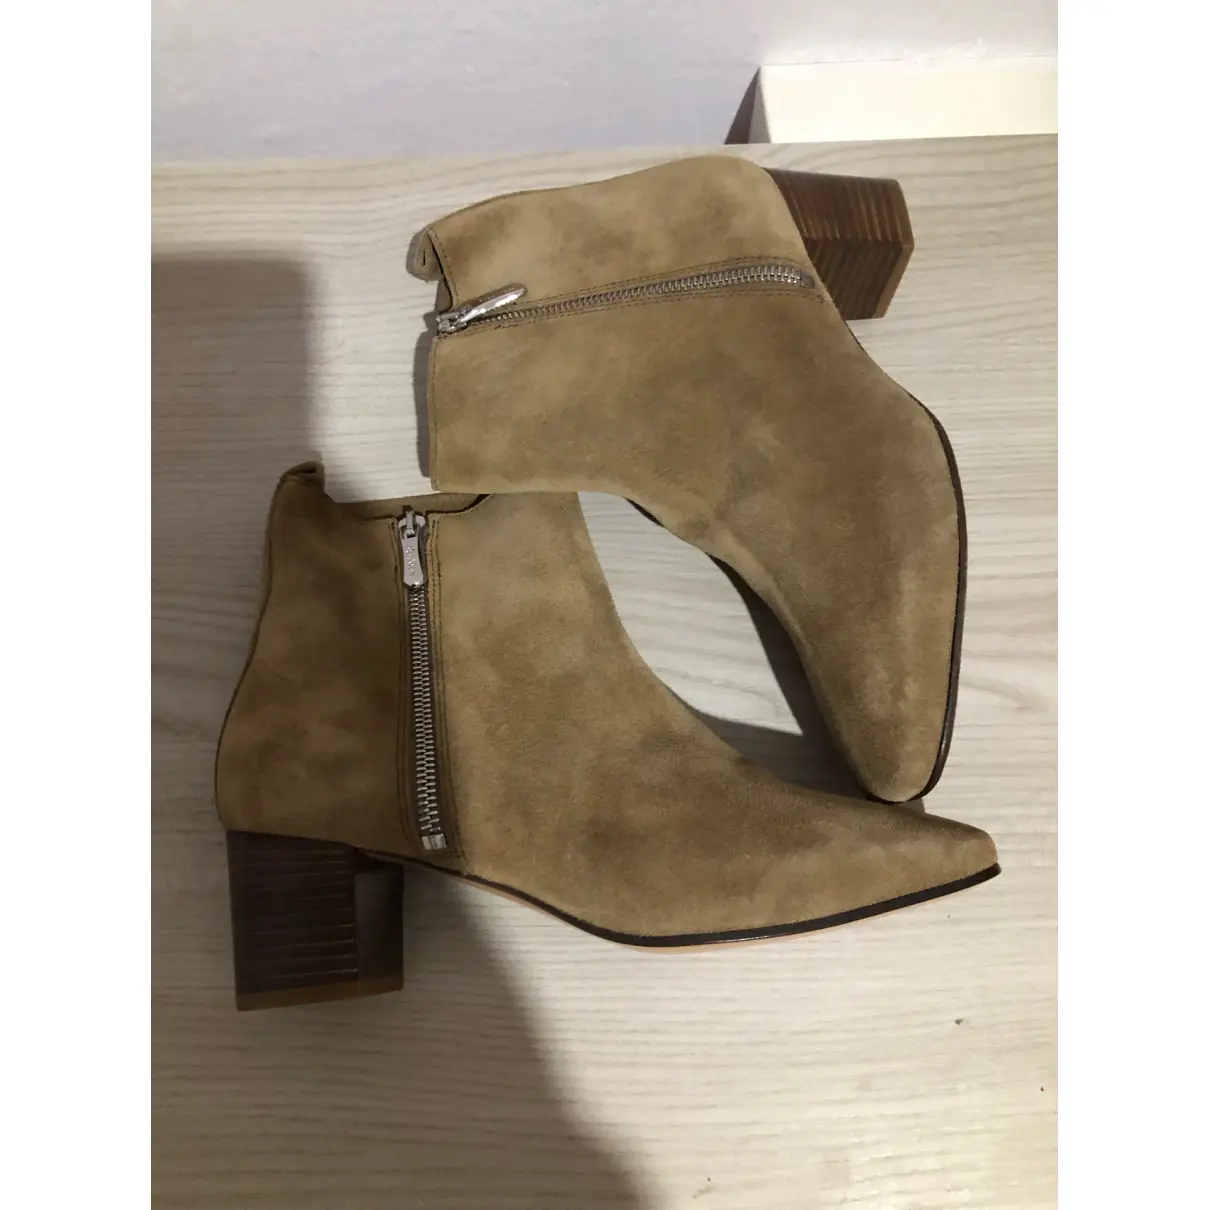 Ankle boots Max Mara